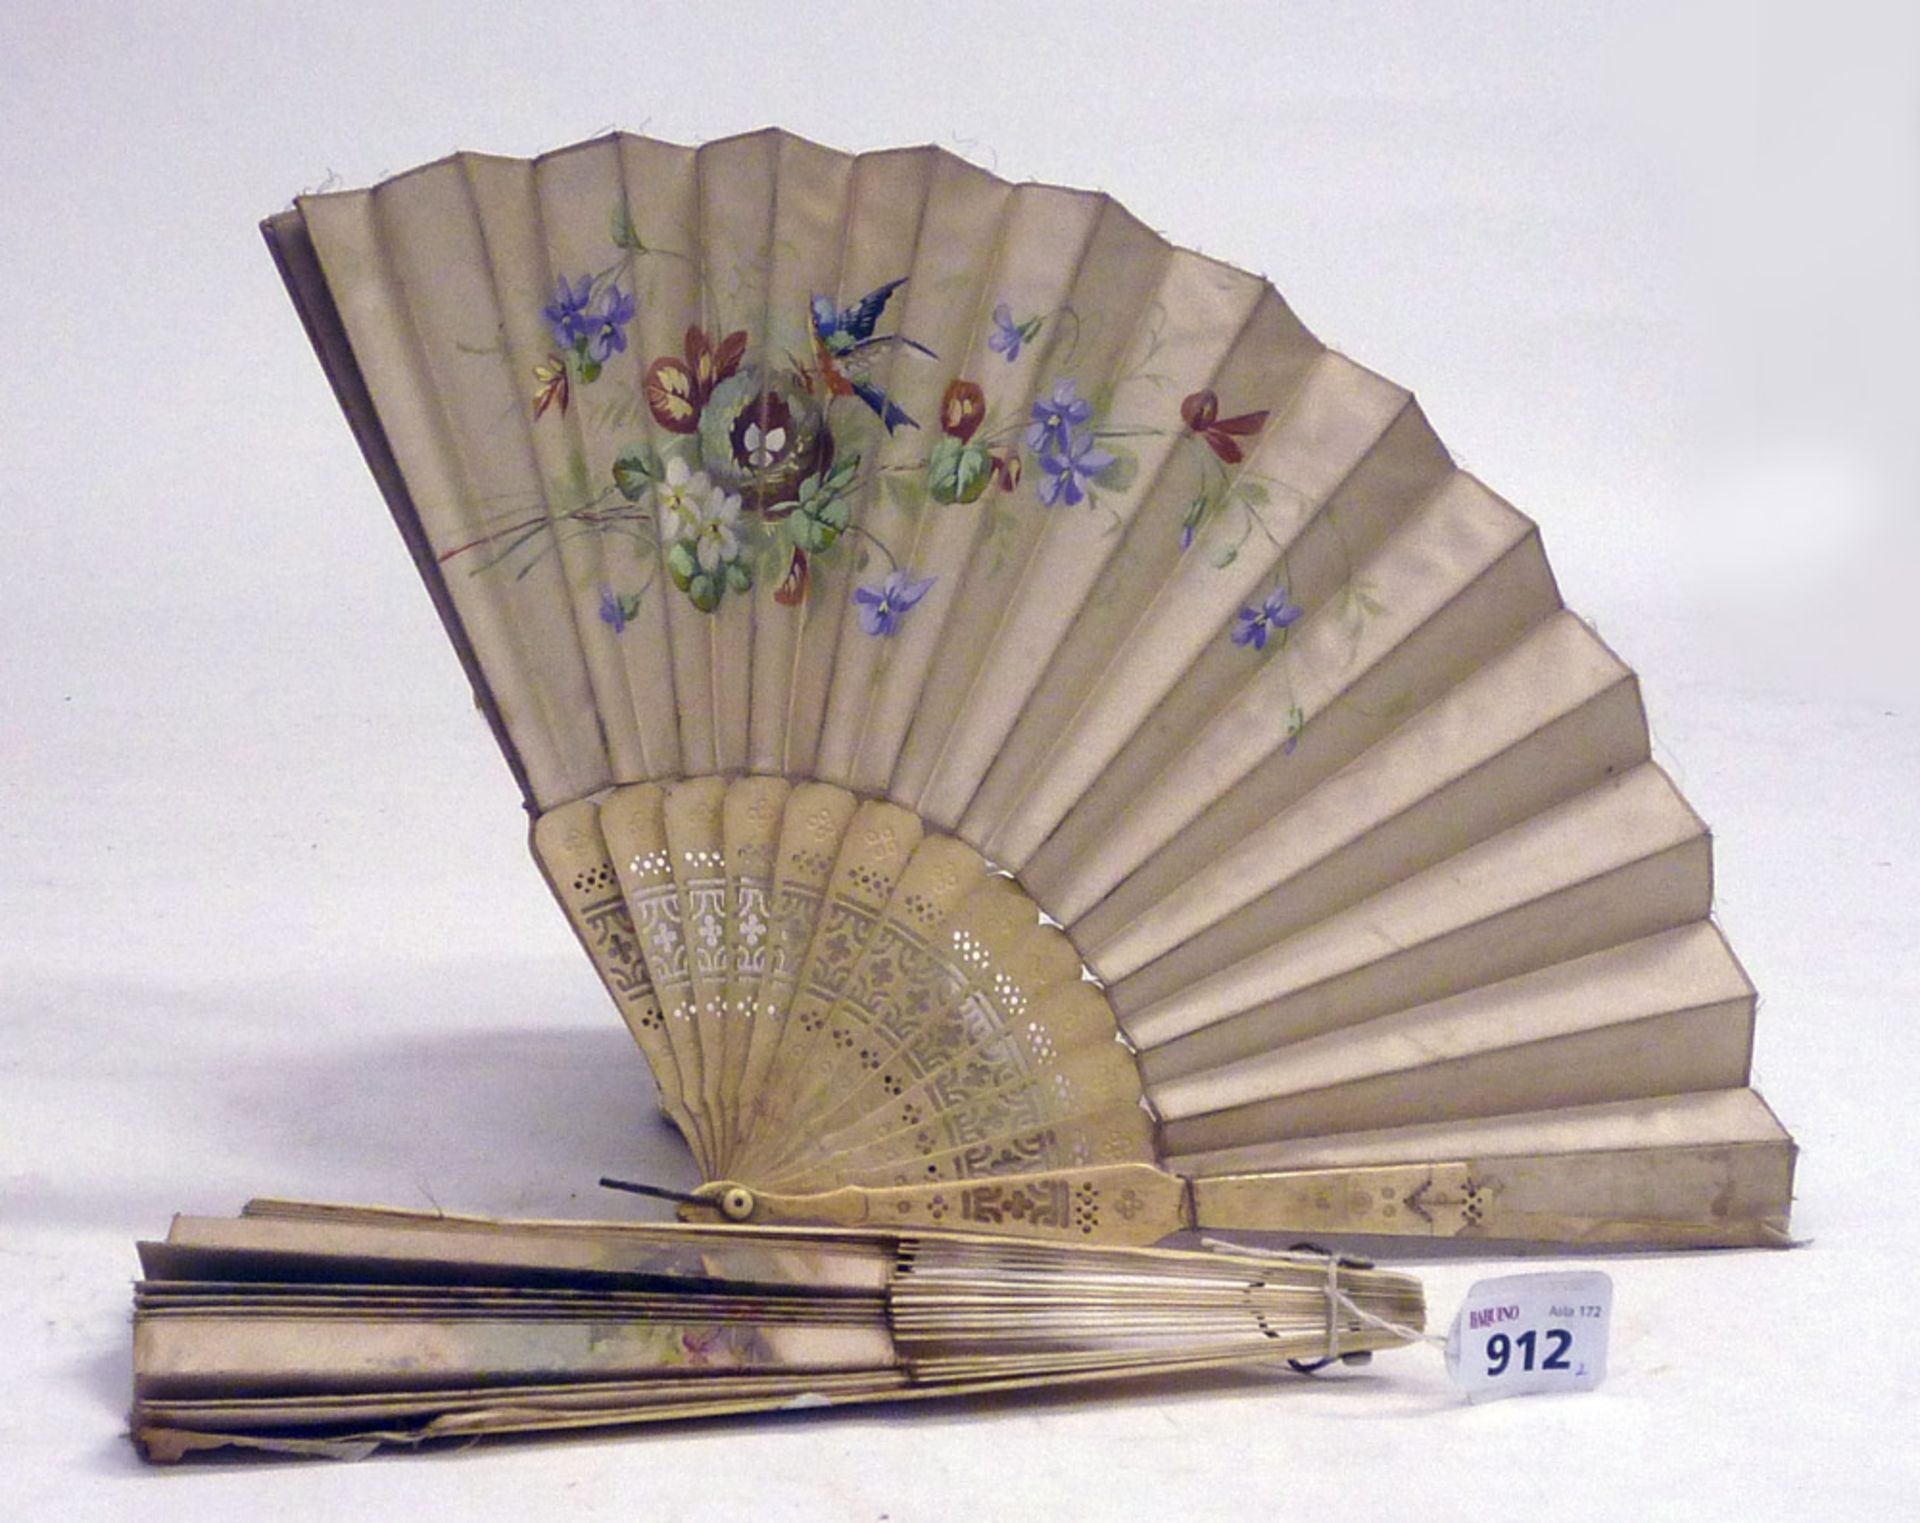 TWO FANS, EARLY 20TH CENTURY in silk decorated with rural scene and flowers. Sticks in pierced